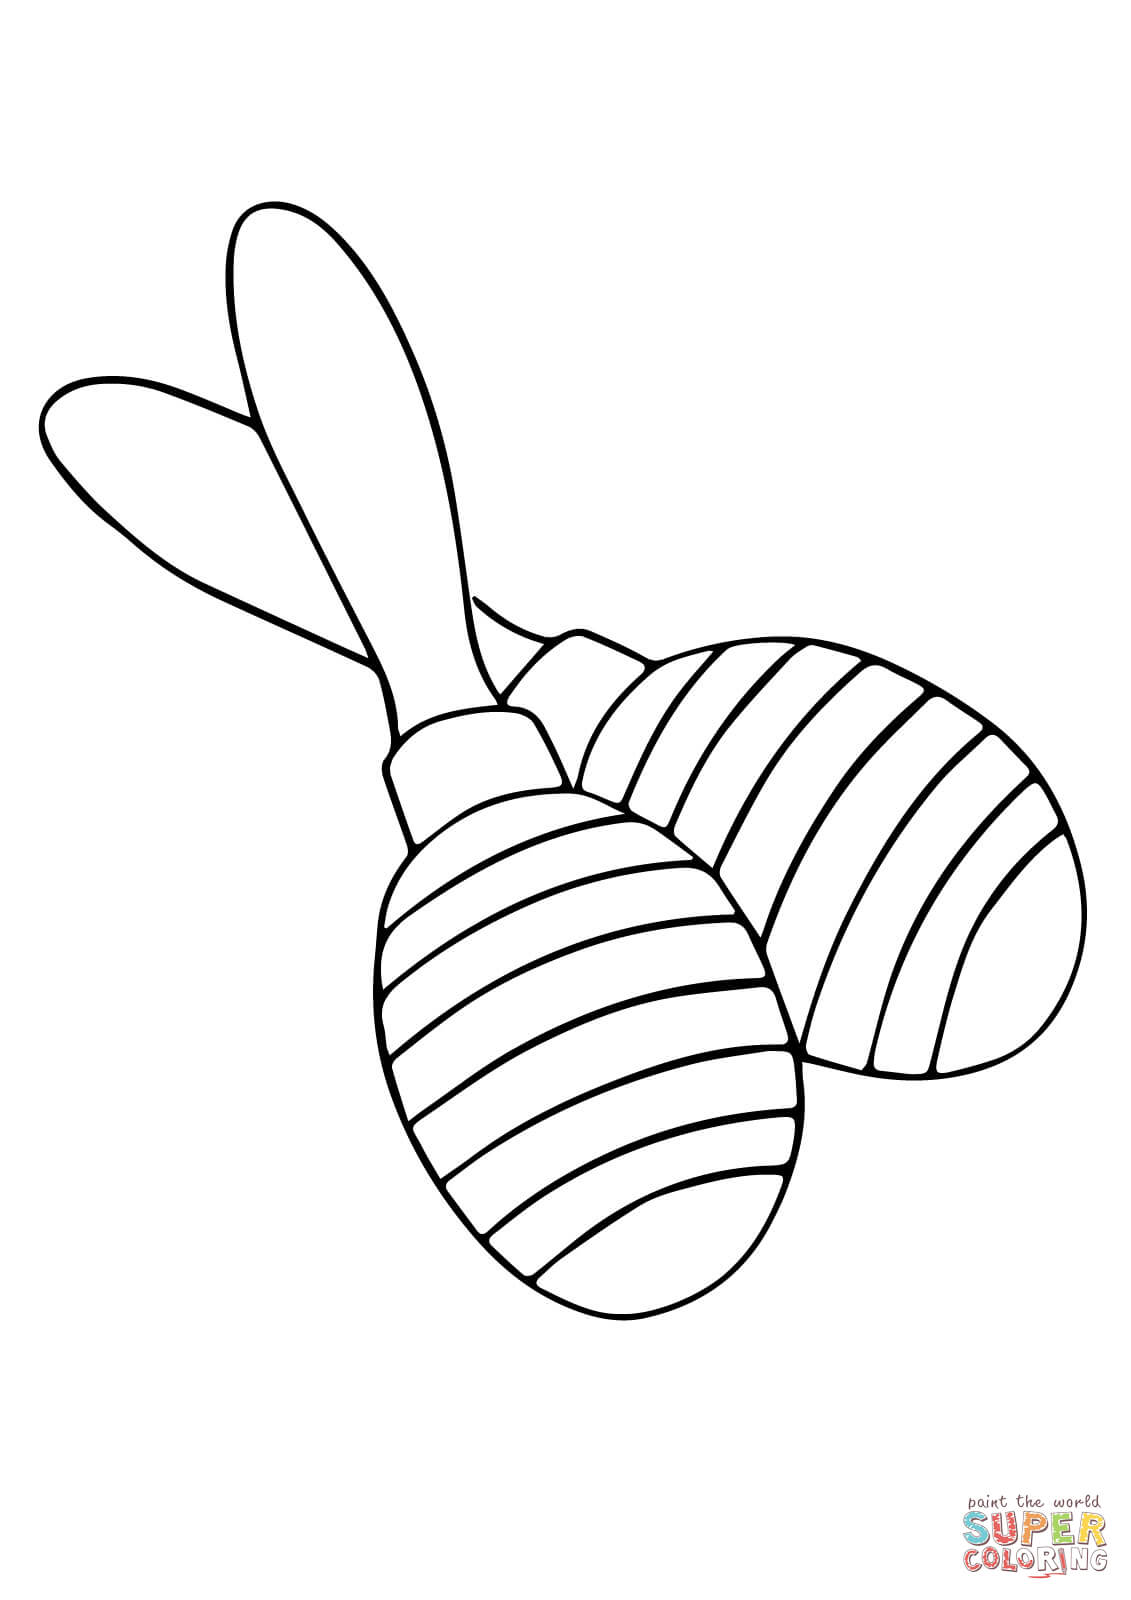 Mexican Maracas coloring page | Free Printable Coloring Pages